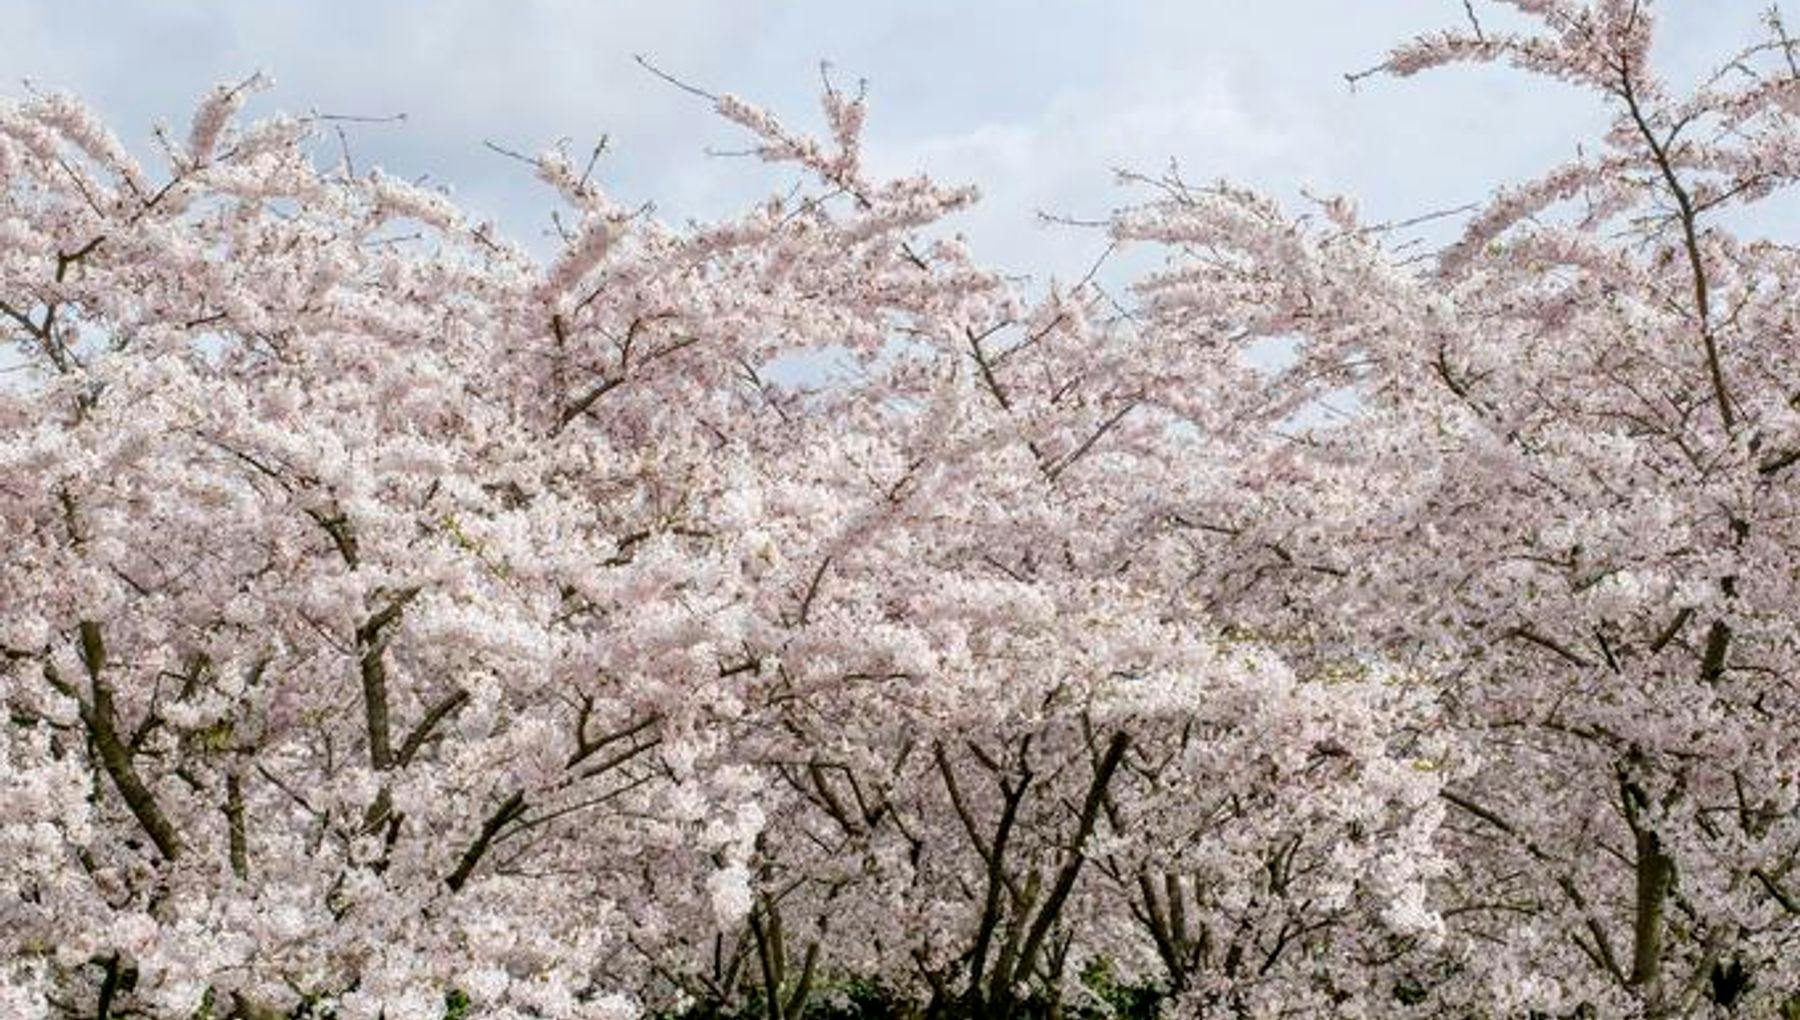 There are 400 cherry trees in the Blossom Park in the Amsterdamse Bos.